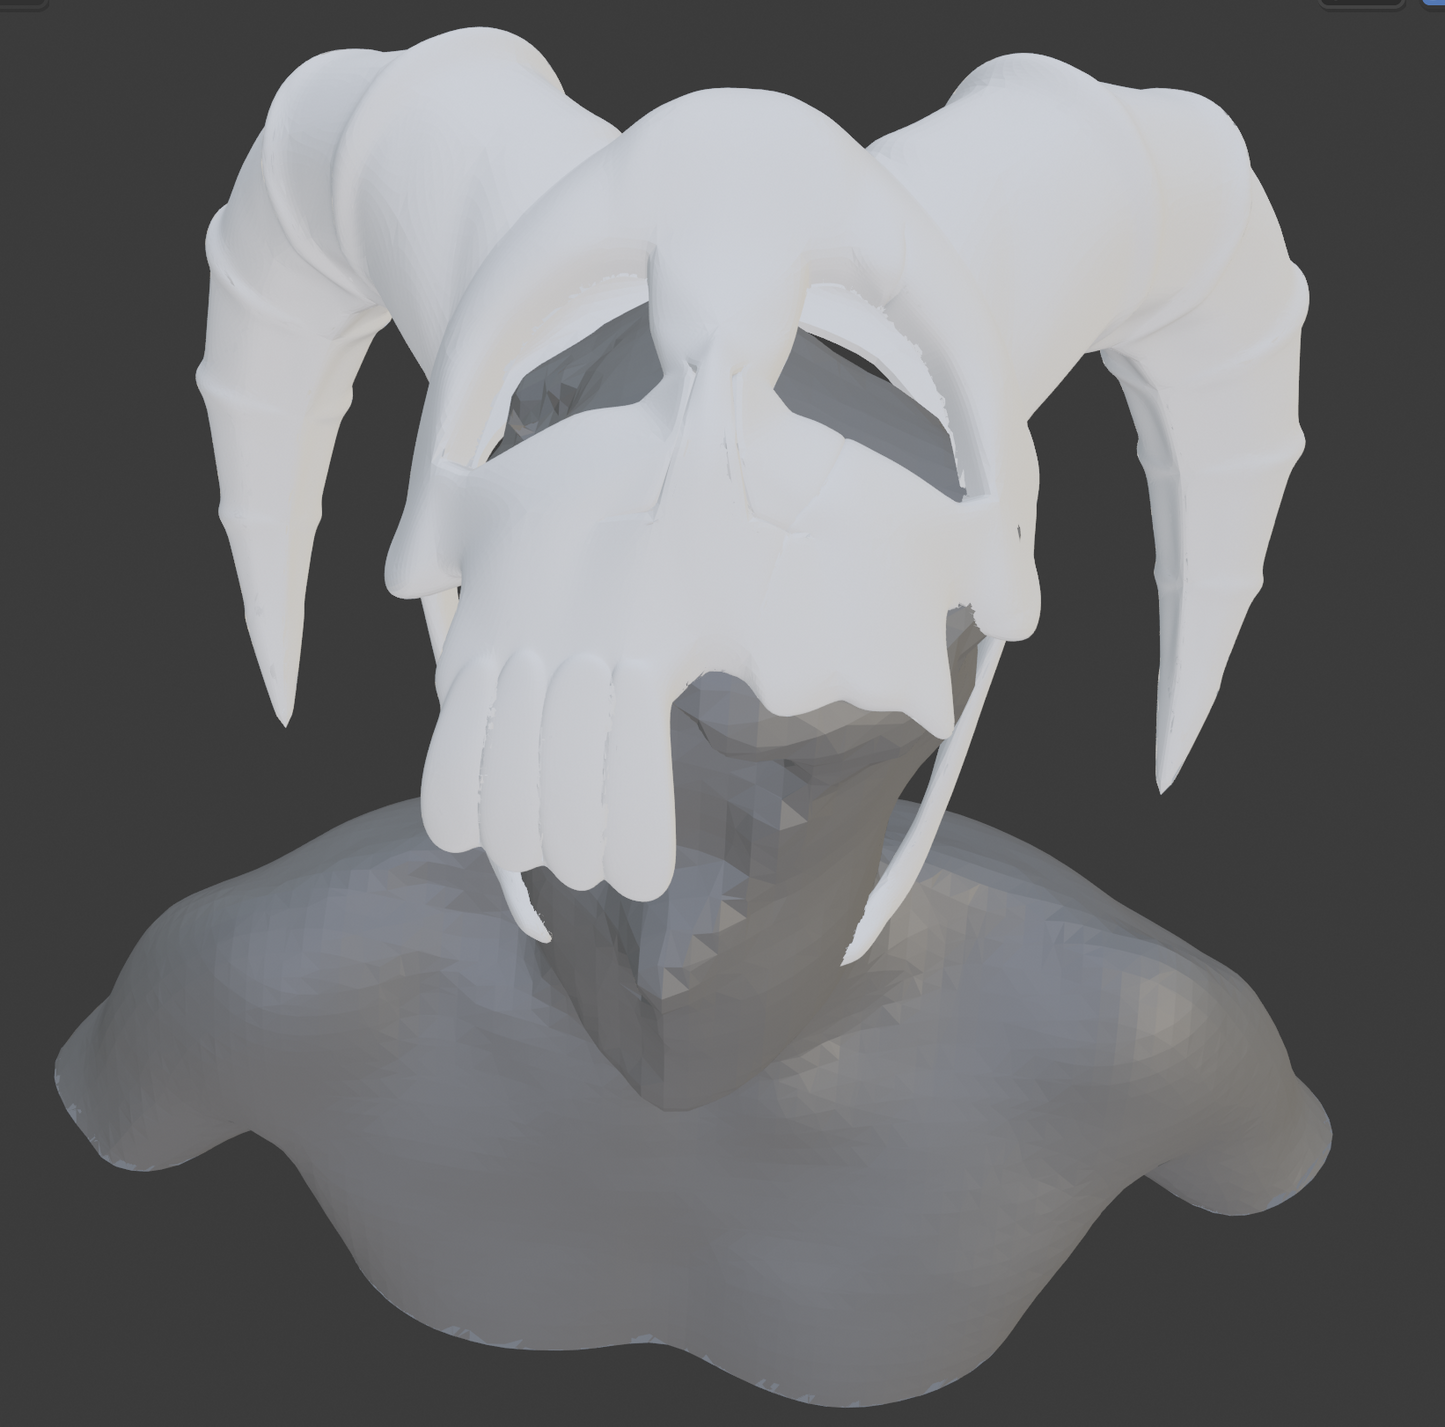 Nelliel Centaur Mask - Digital 3D Model and Physical 3D Printed Kit Options - Nelliel Cosplay